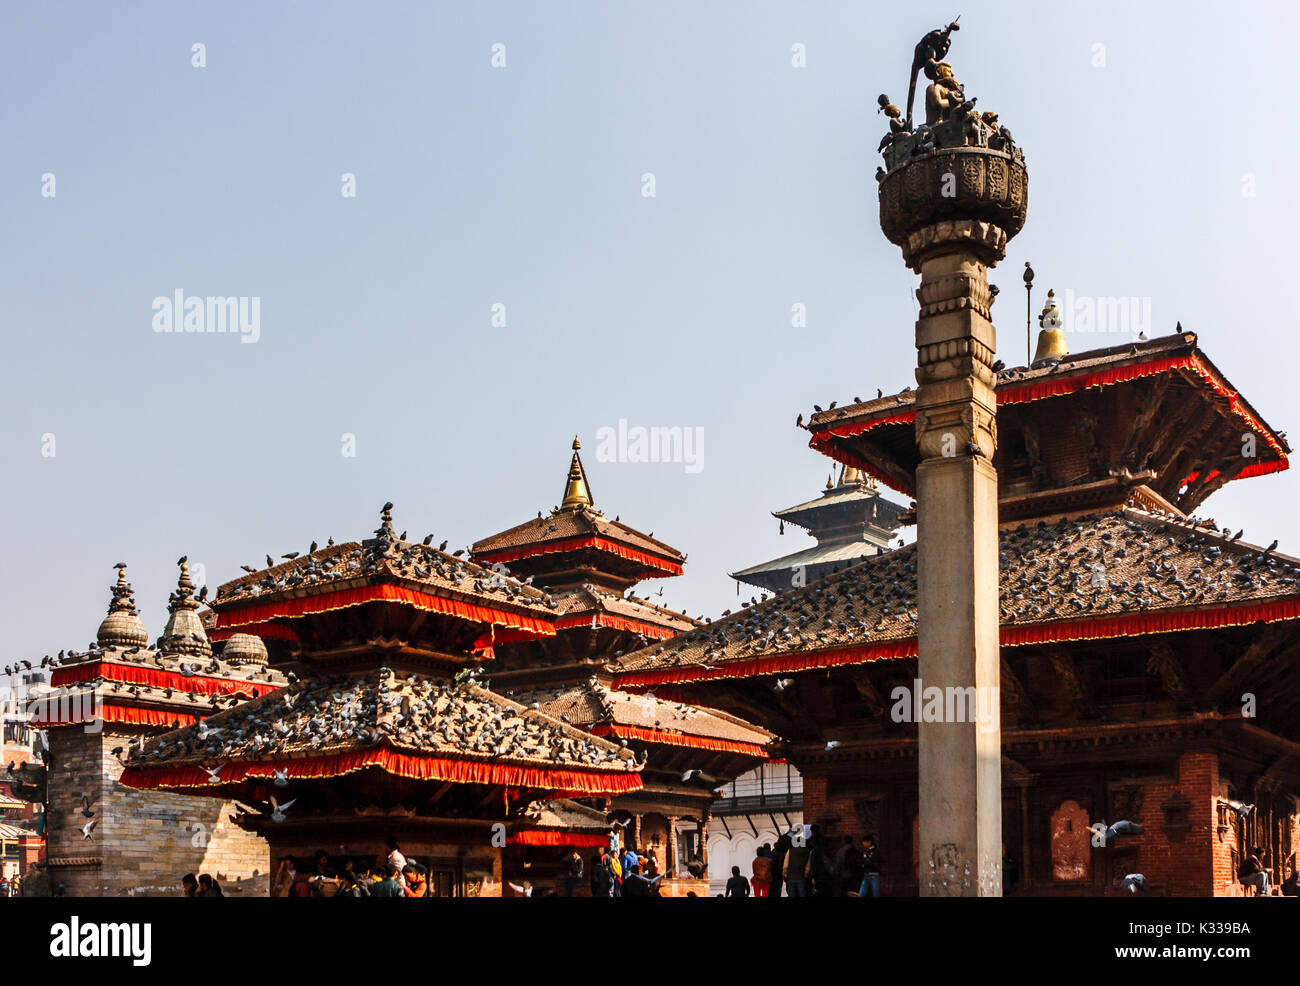 Pigeons covering Kathmandu's Durbar square's temples and pagodas Stock Photo